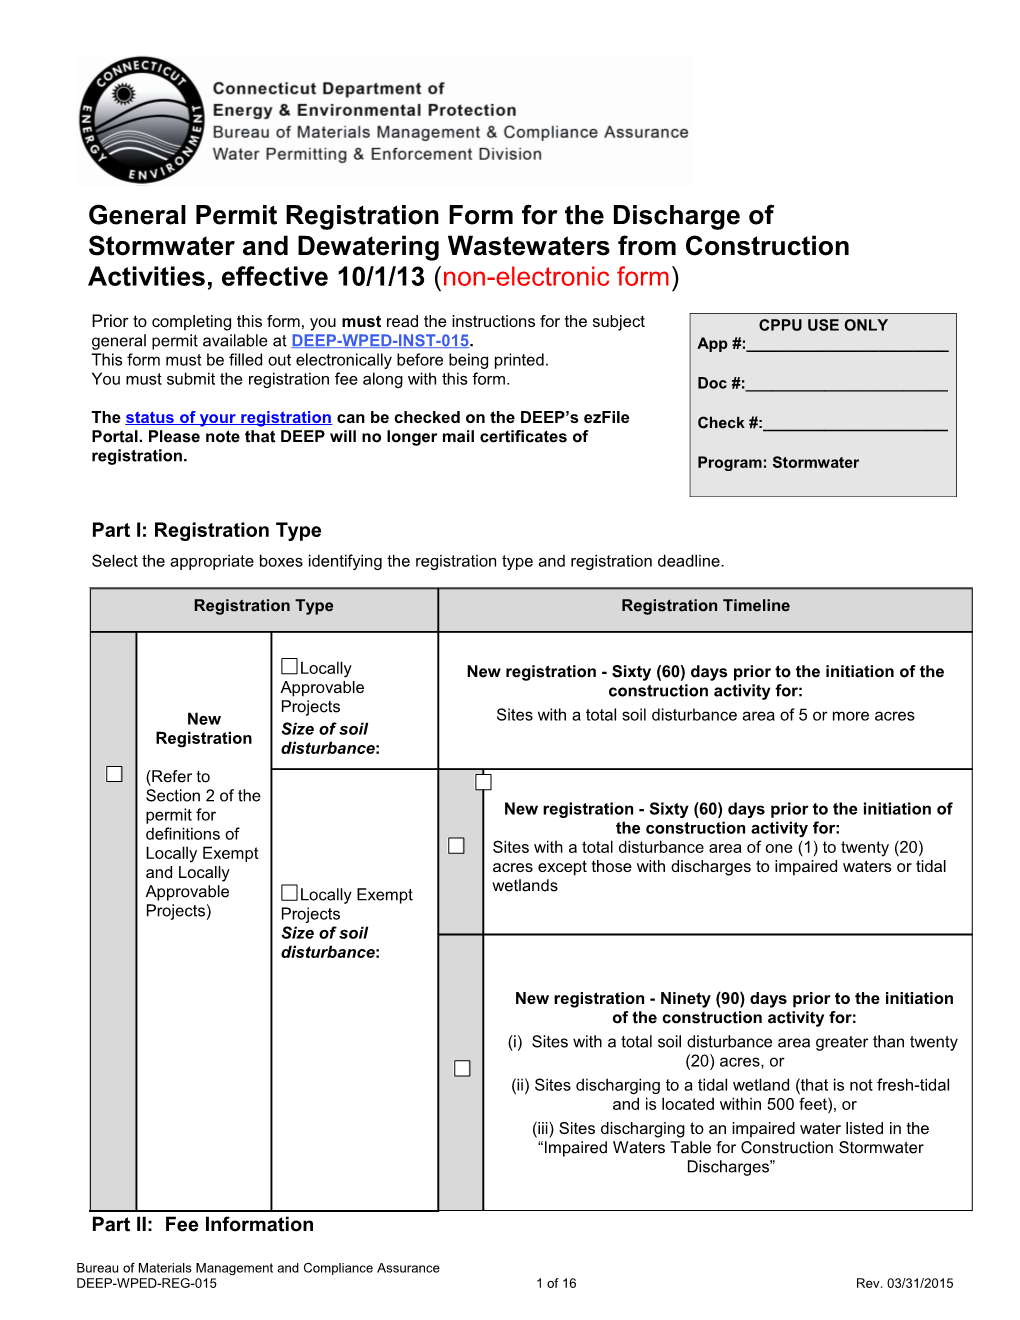 General Permit Registration Form for the Discharge of Stormwater Associated with Construction